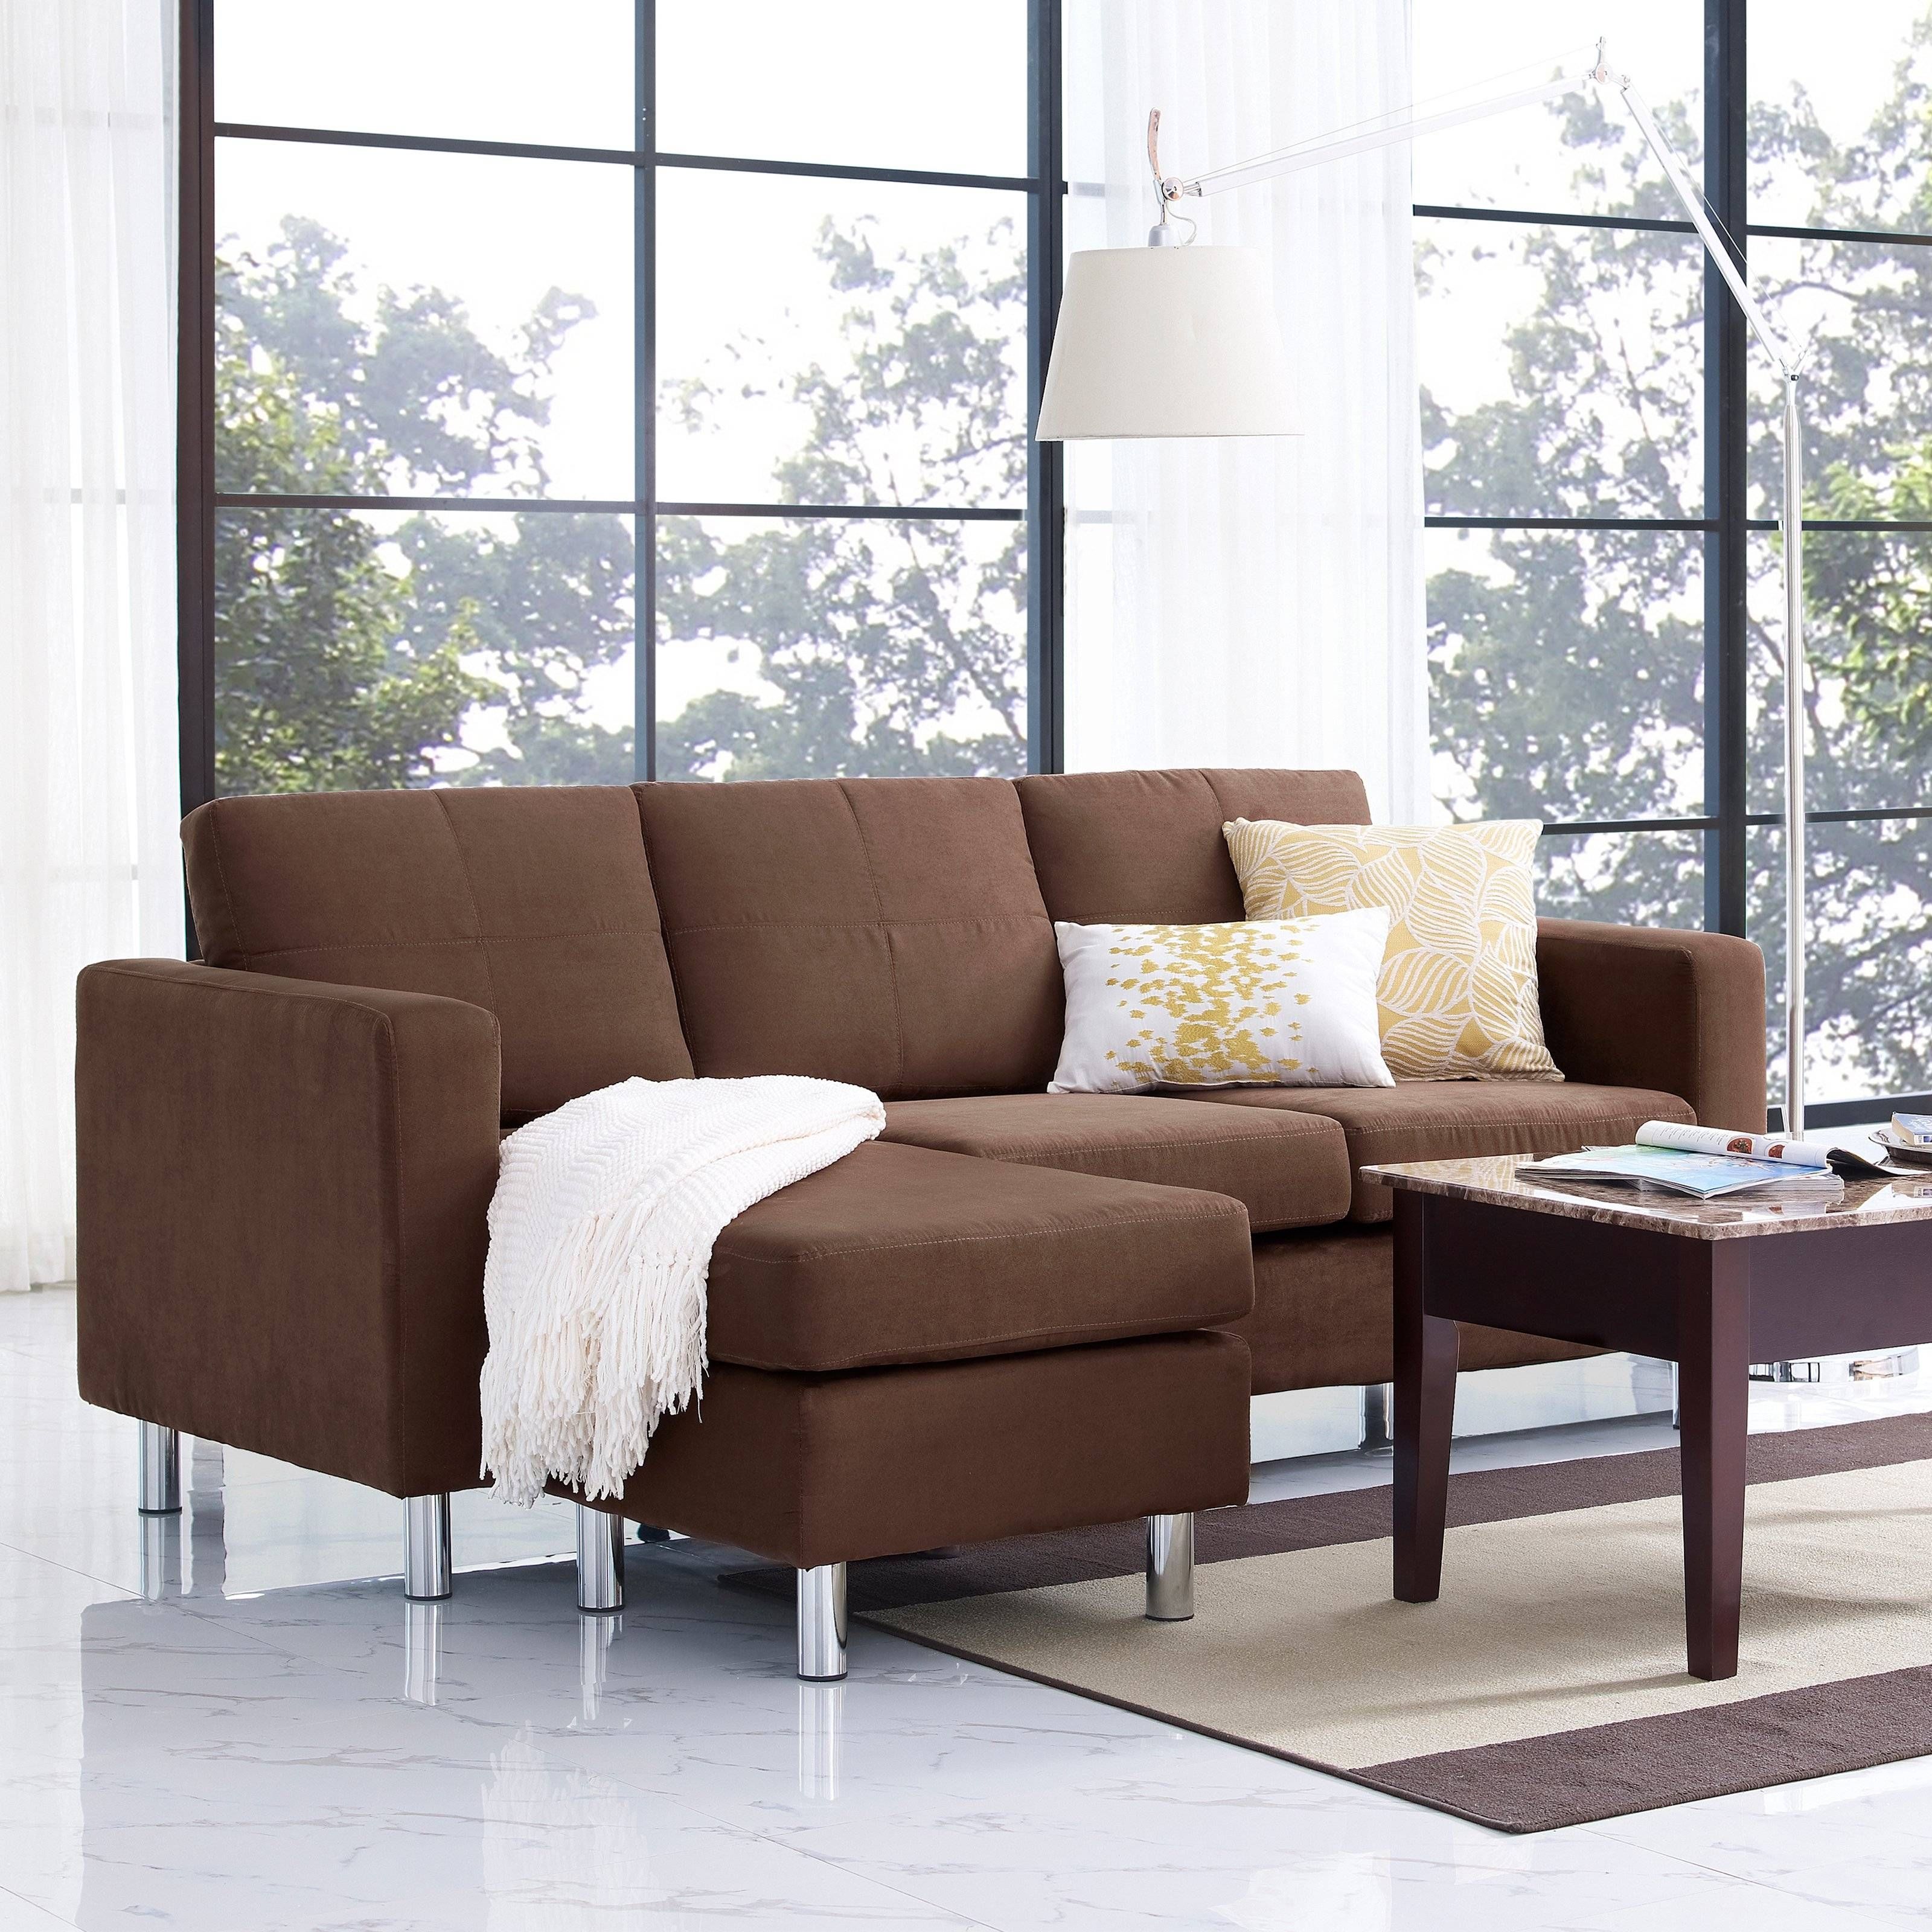 Dorel Living Small Spaces Configurable Sectional Sofa | Hayneedle For Small Spaces Configurable Sectional Sofas (View 8 of 15)